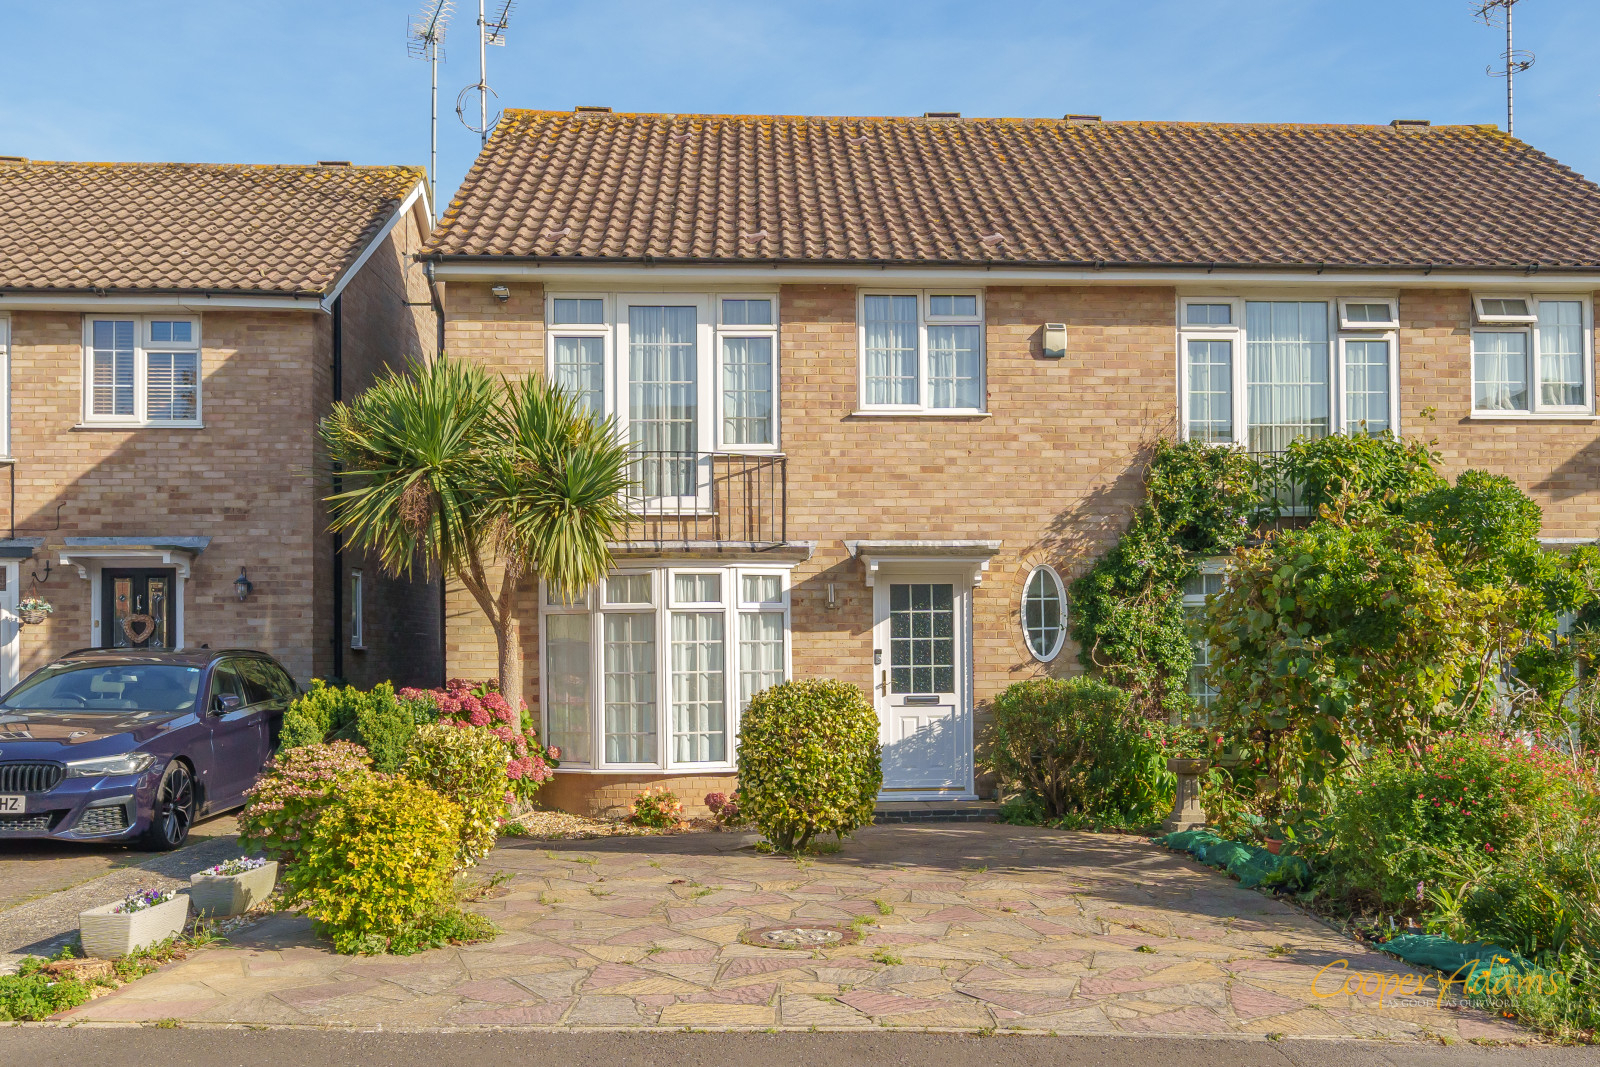 3 bed house for sale in Georgian Gardens, Rustington - Property Image 1